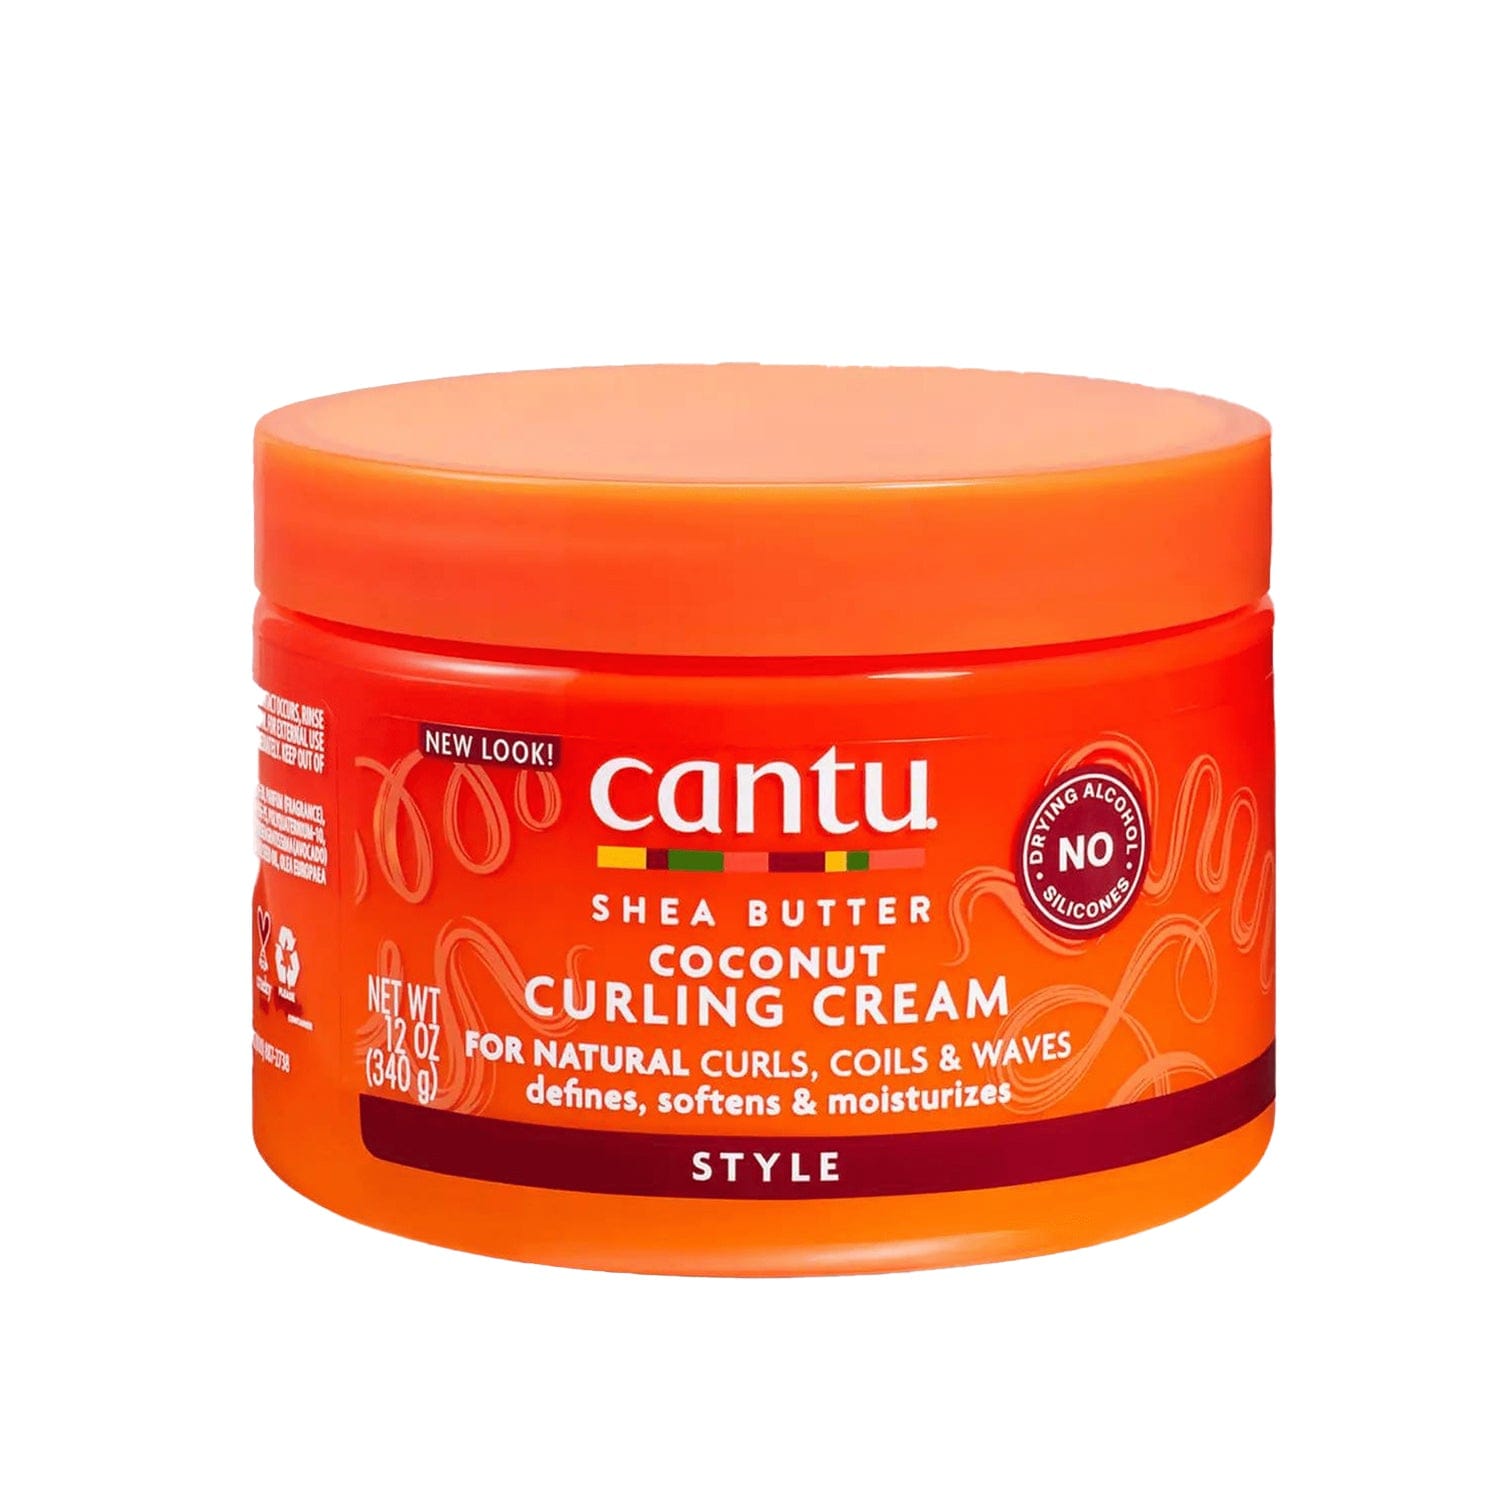 Cantu - Shea Butter - Crème boucles coco "curling" - 340g (new packaging) - Cantu - Ethni Beauty Market